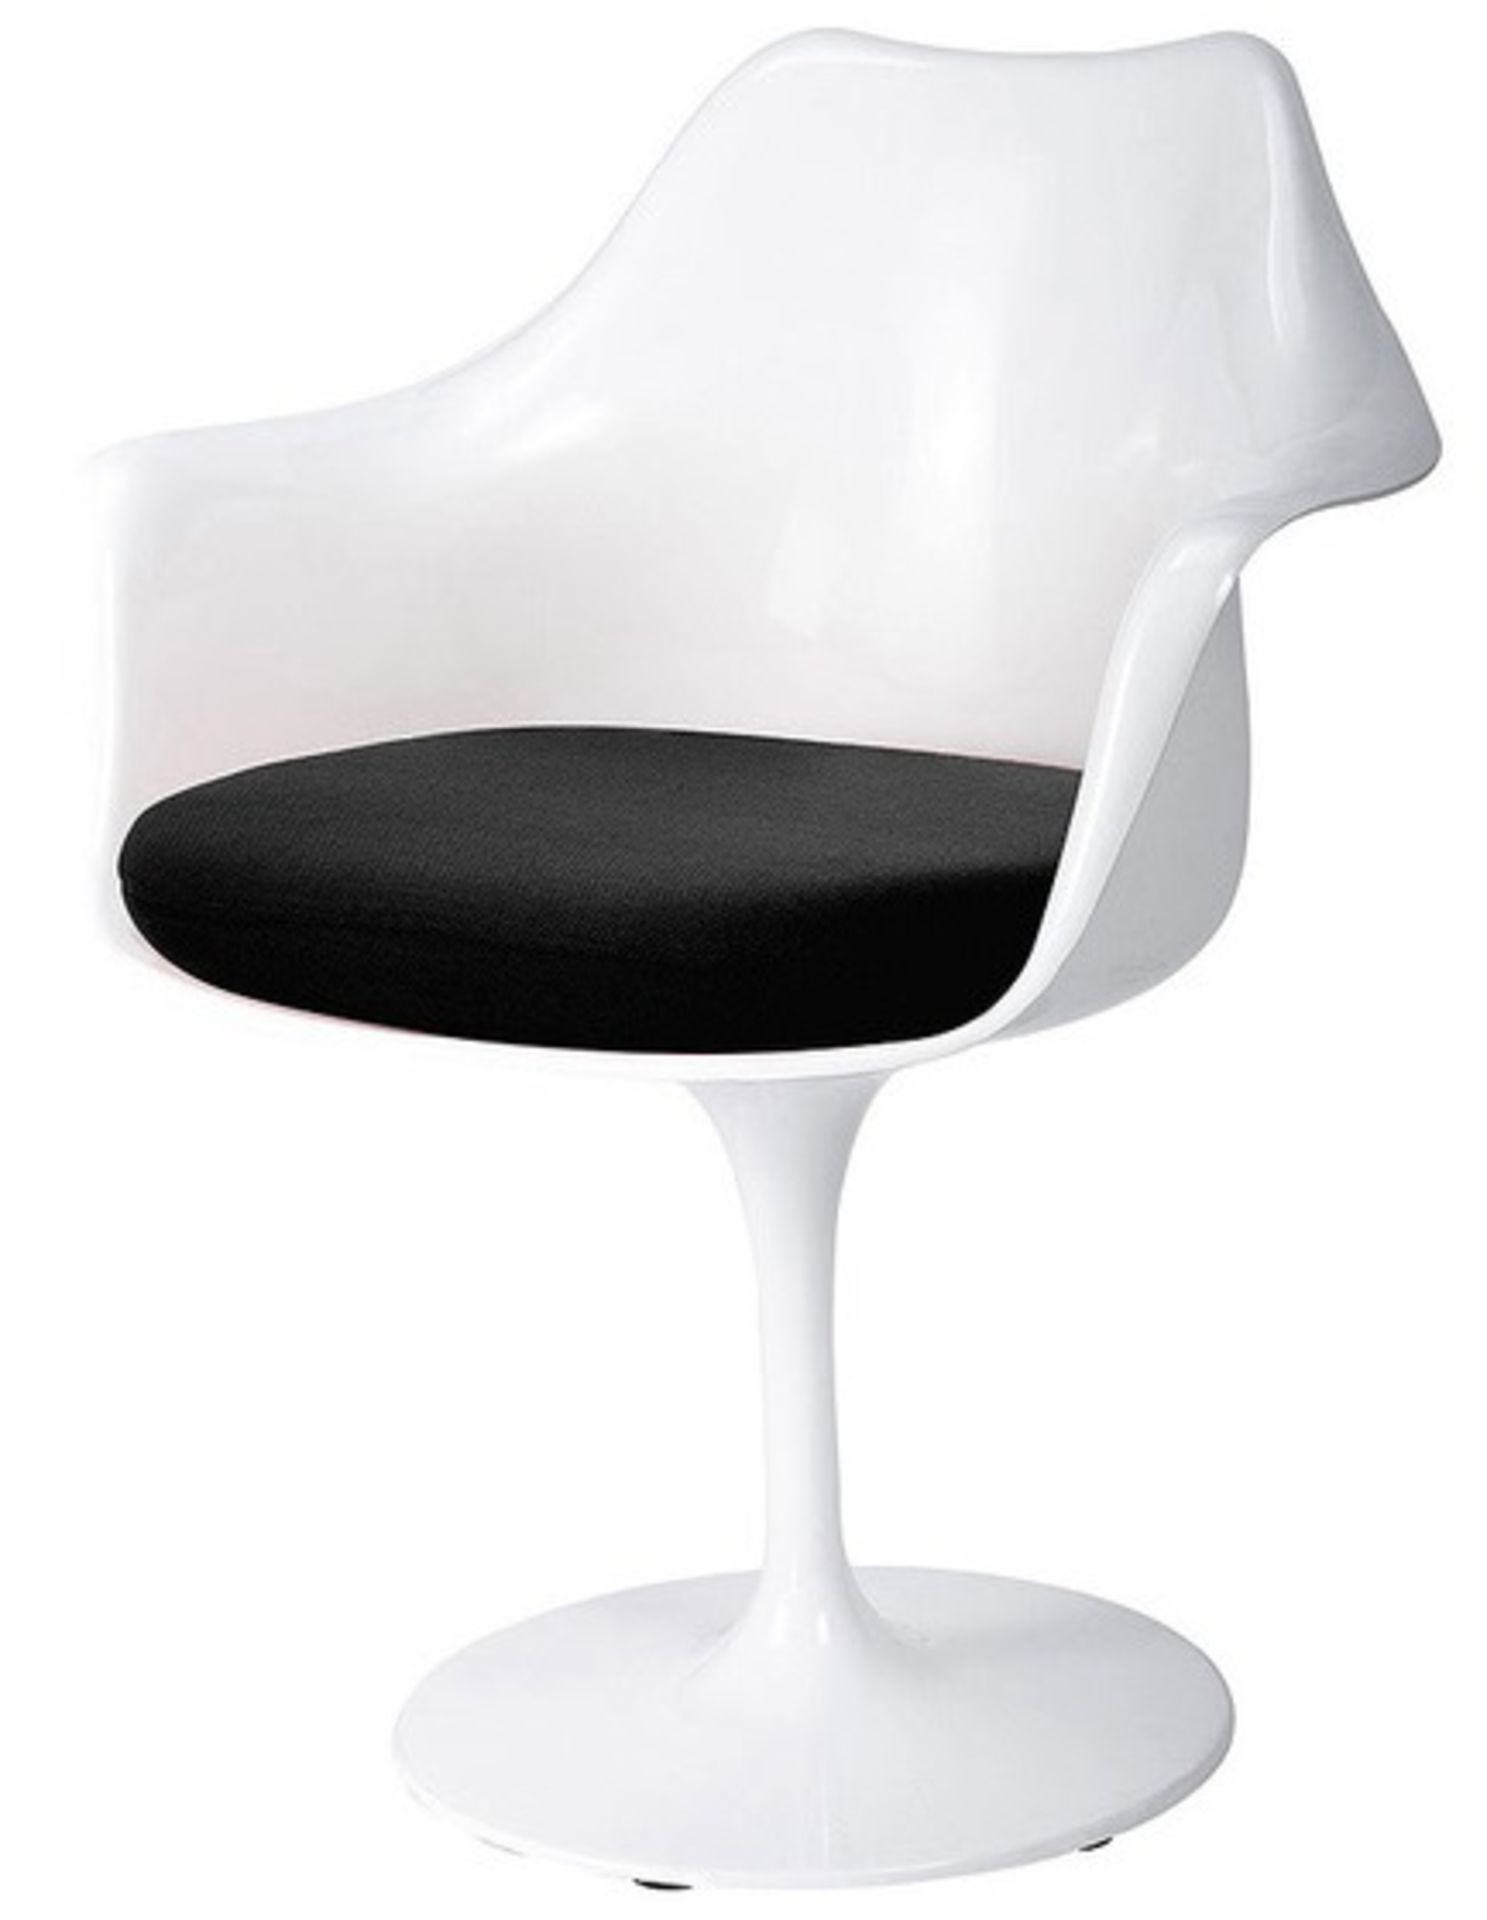 1 x Eero Saarinen Inspired Tulip Armchair In White With Black Fabric Cushion - Brand New Boxed Stock - Image 2 of 2